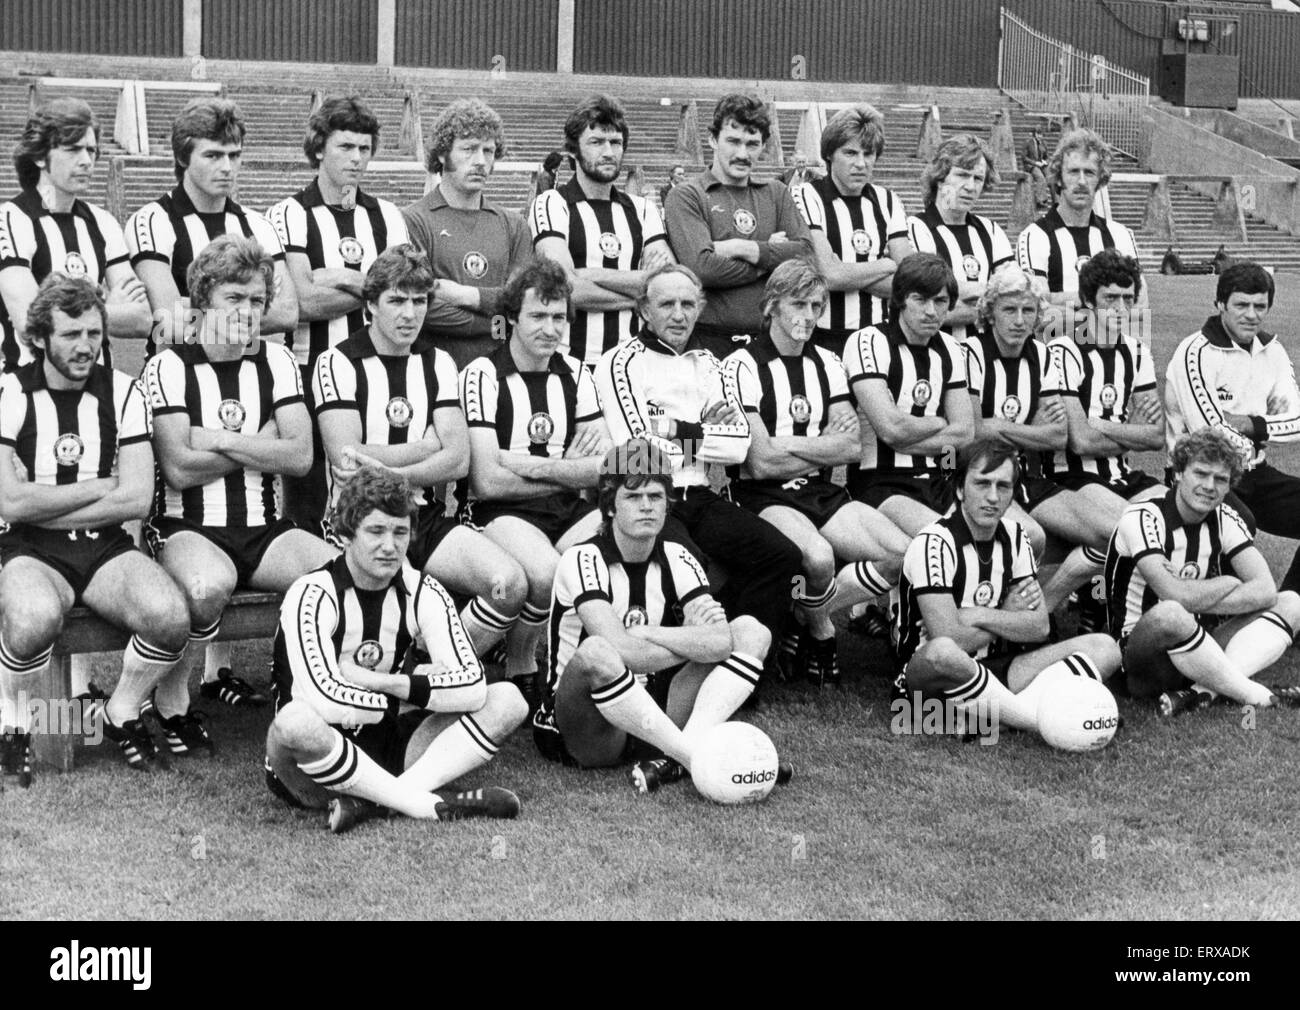 Newcastle United Football Club pose for a squad photograph ahead of the 1978 - 1979 season. Back row Left to right: Ralph Callachan, Allan Michael 'Mickey' Barker, Andy Parkinson, Mike Mahoney, John Bird, Kevin Carr, David Barton, John Blakely and John Connolly. Middle row: Alan Kennedy, Kenny Mitchell, mark McGhee, Tommy Cassidy, manager Bill McGarry, Mie Lanach, Irving Nattrass, Peter Kelly, Terry Hibbitt, and assistant manager Peter Morris. Front row: Alan Guy, Nigel Waler, Jamie Scott and ray Blackhall. August 1978. Stock Photo